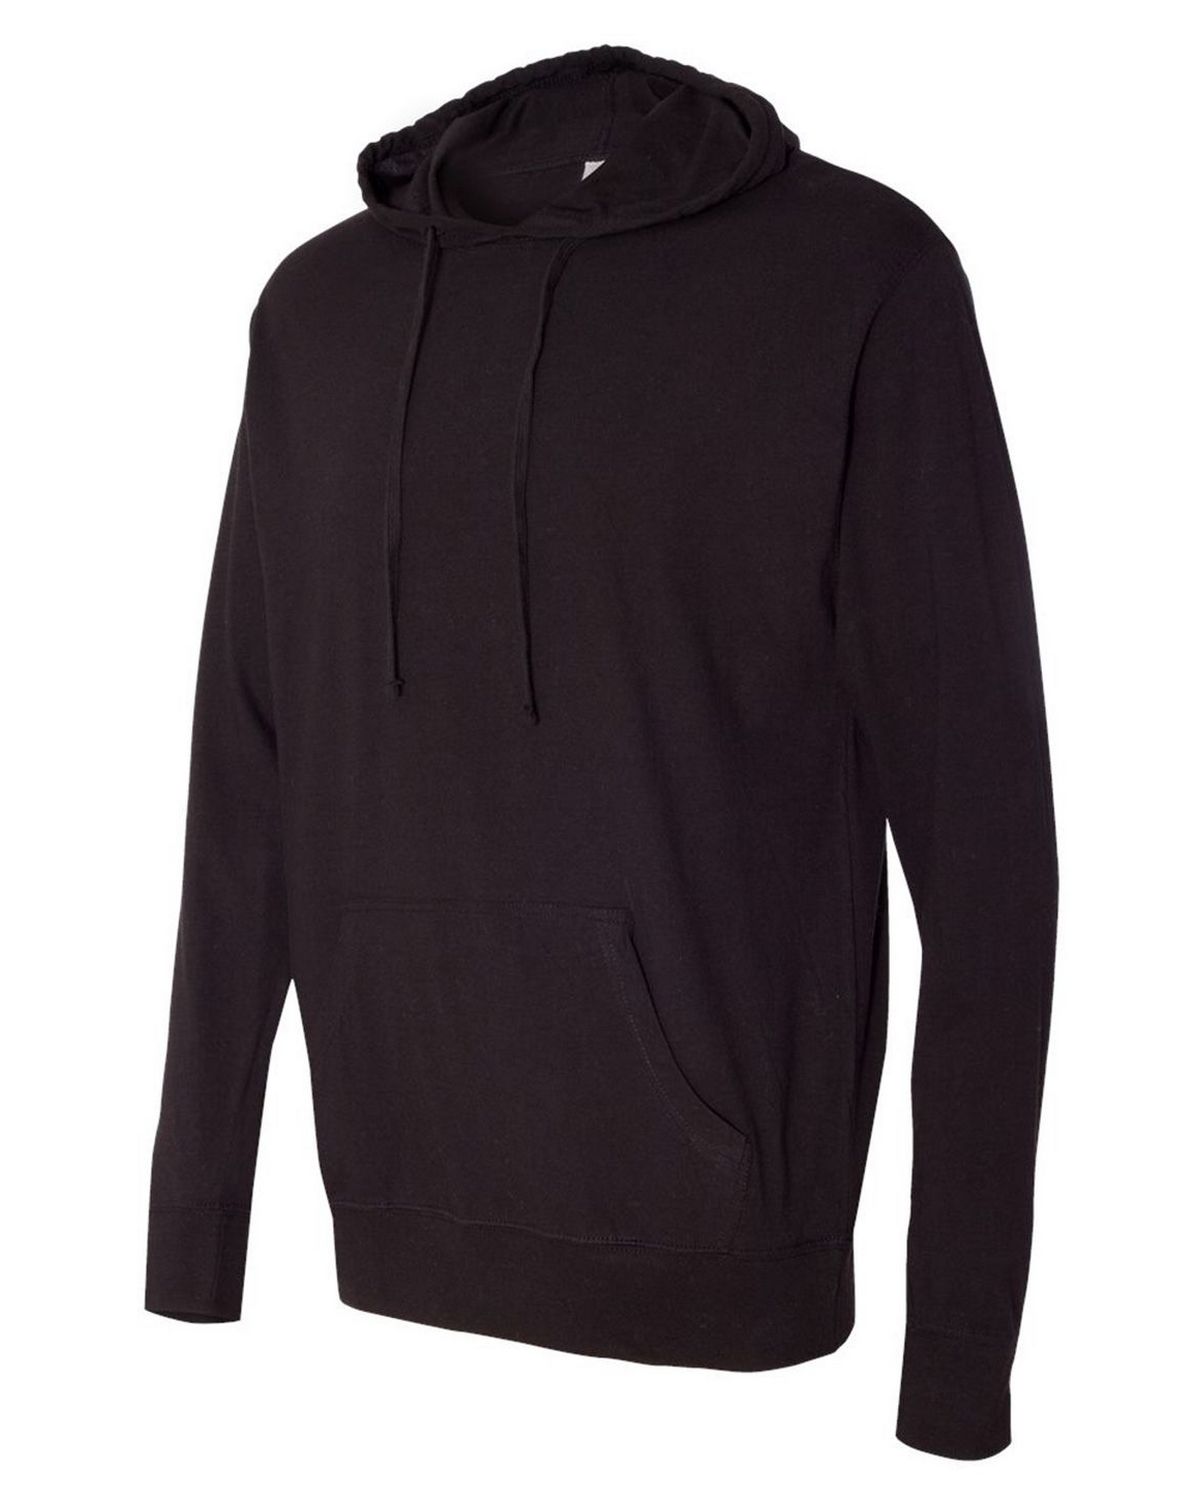 'Independent Trading Co. SS150J Lightweight Hooded Pullover T-Shirt'